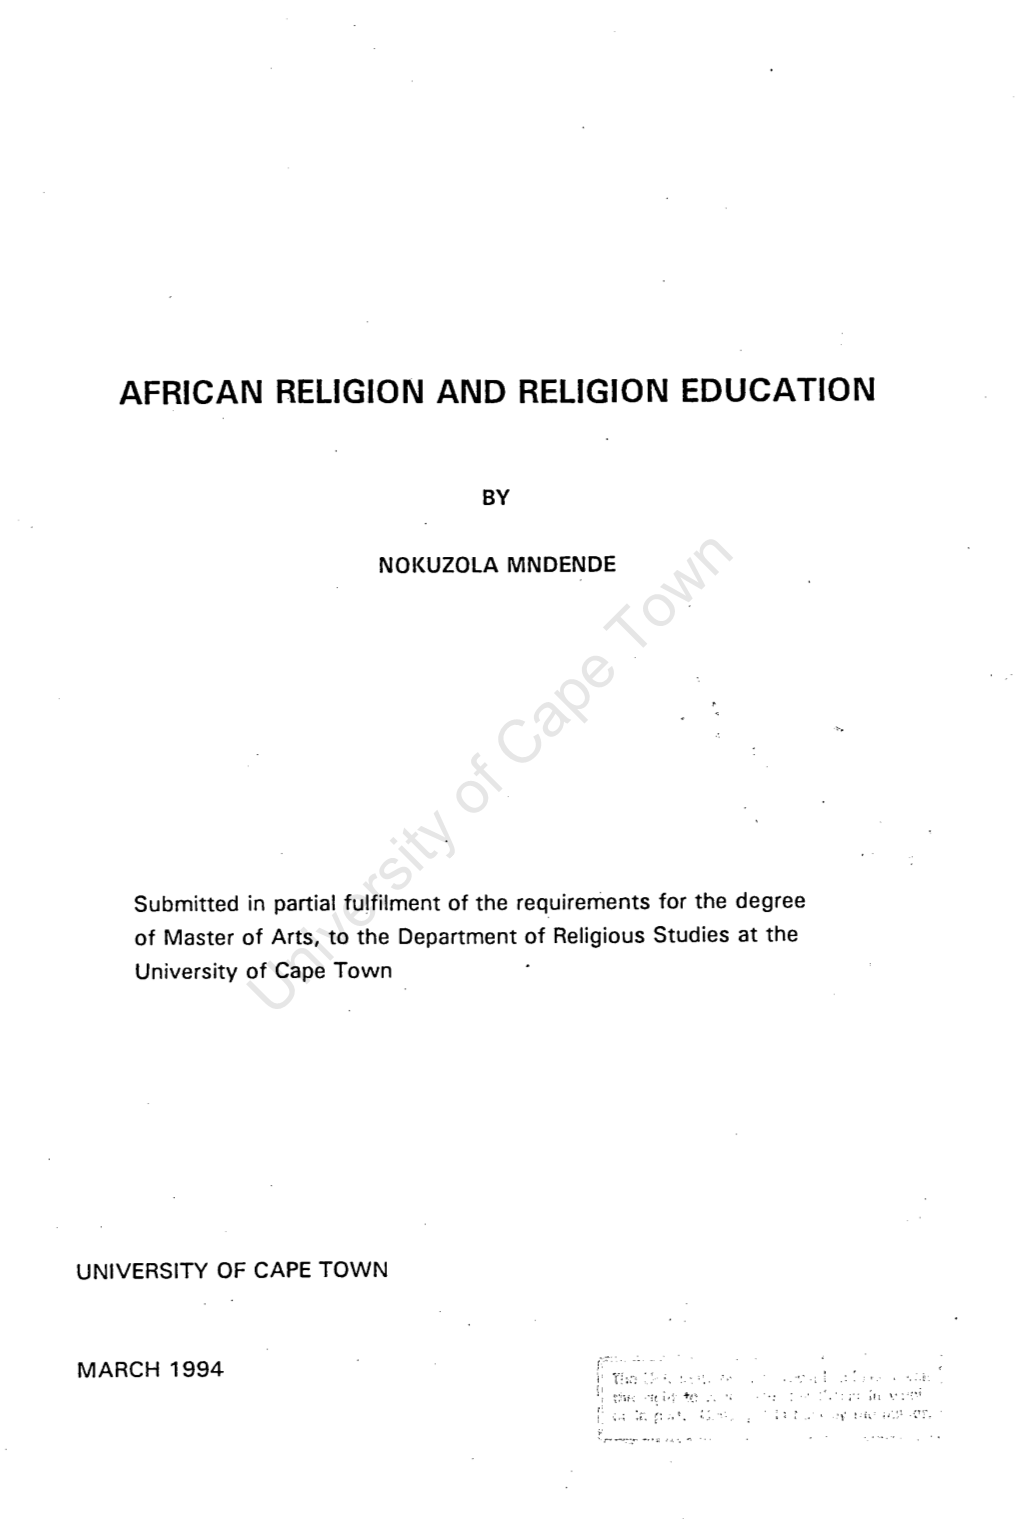 African Religion and Religion Education